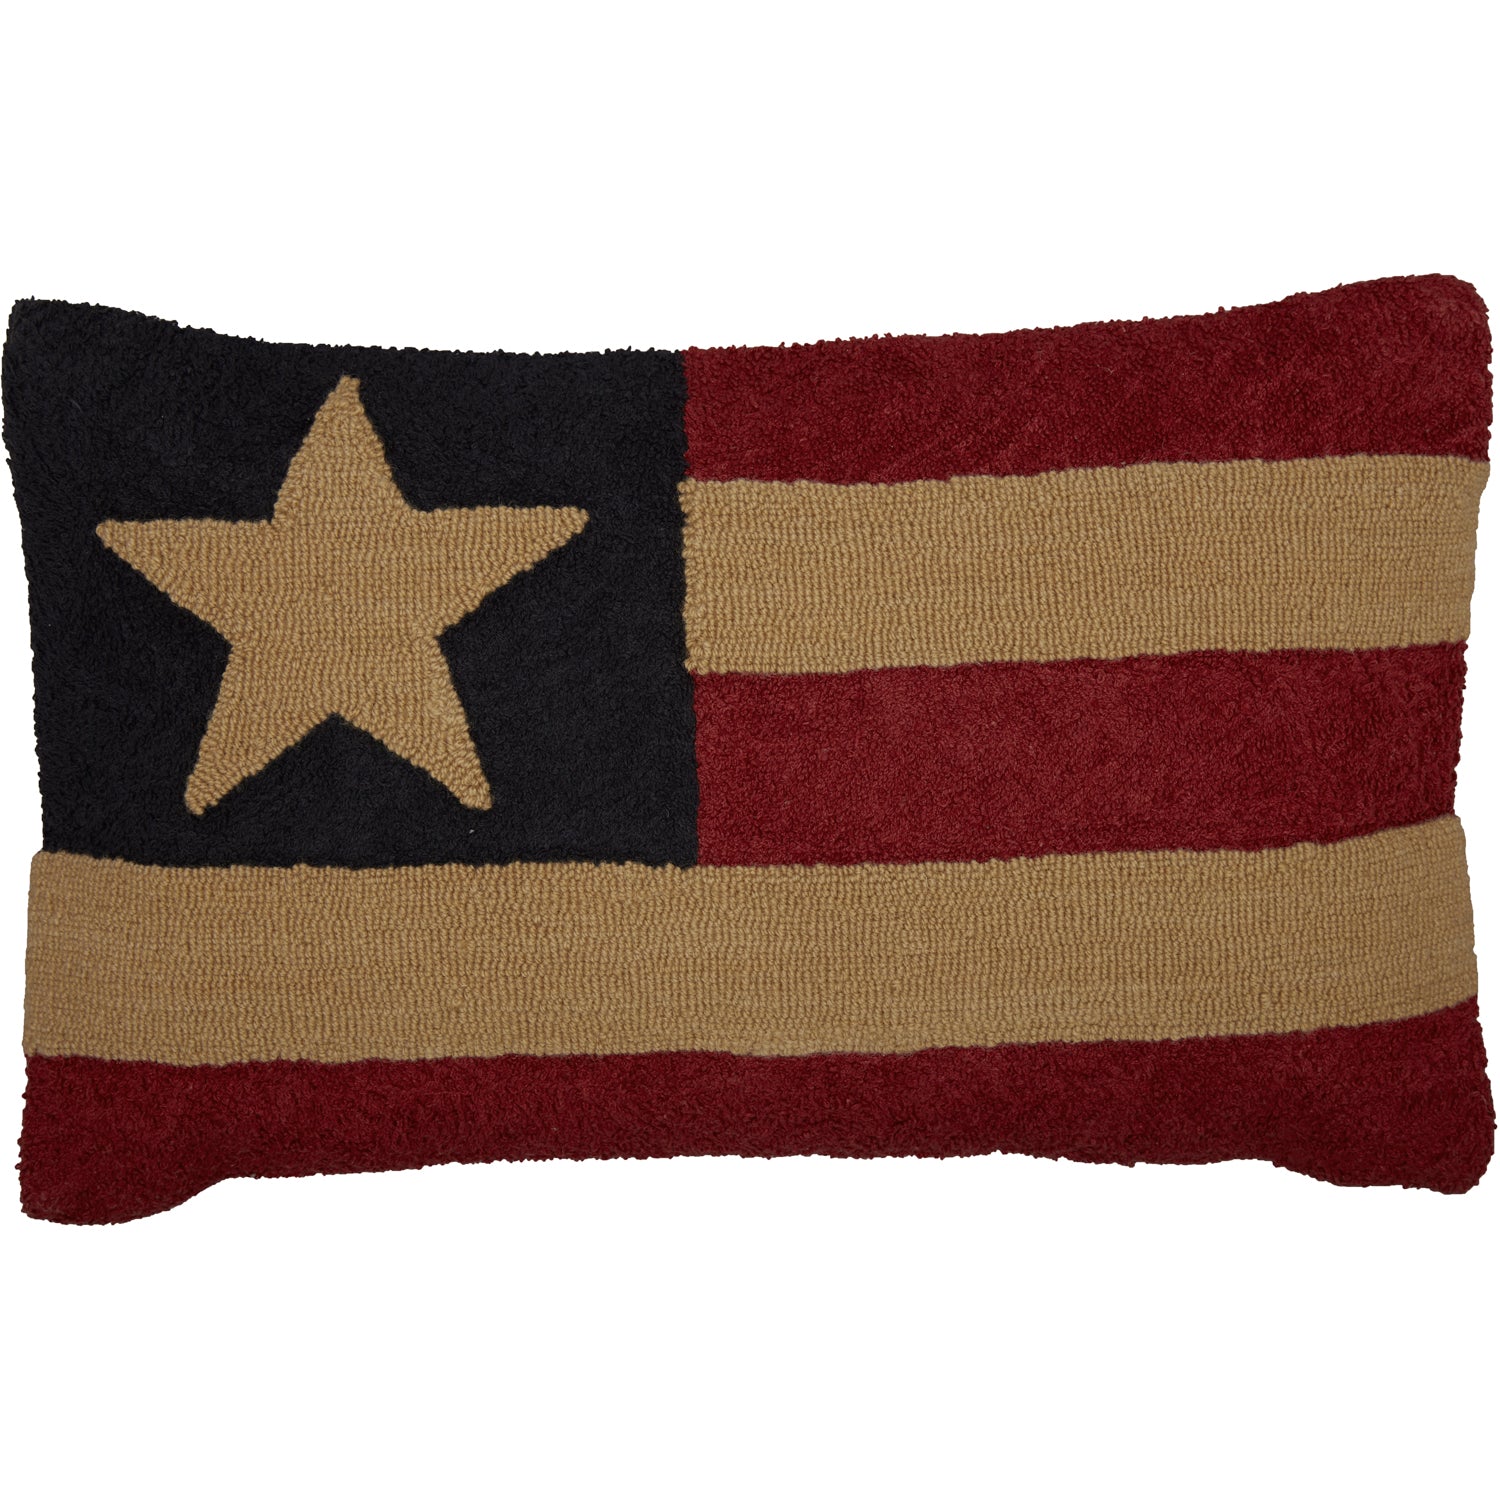 56747-Patriotic-Patch-Flag-Hooked-Pillow-14x22-image-4